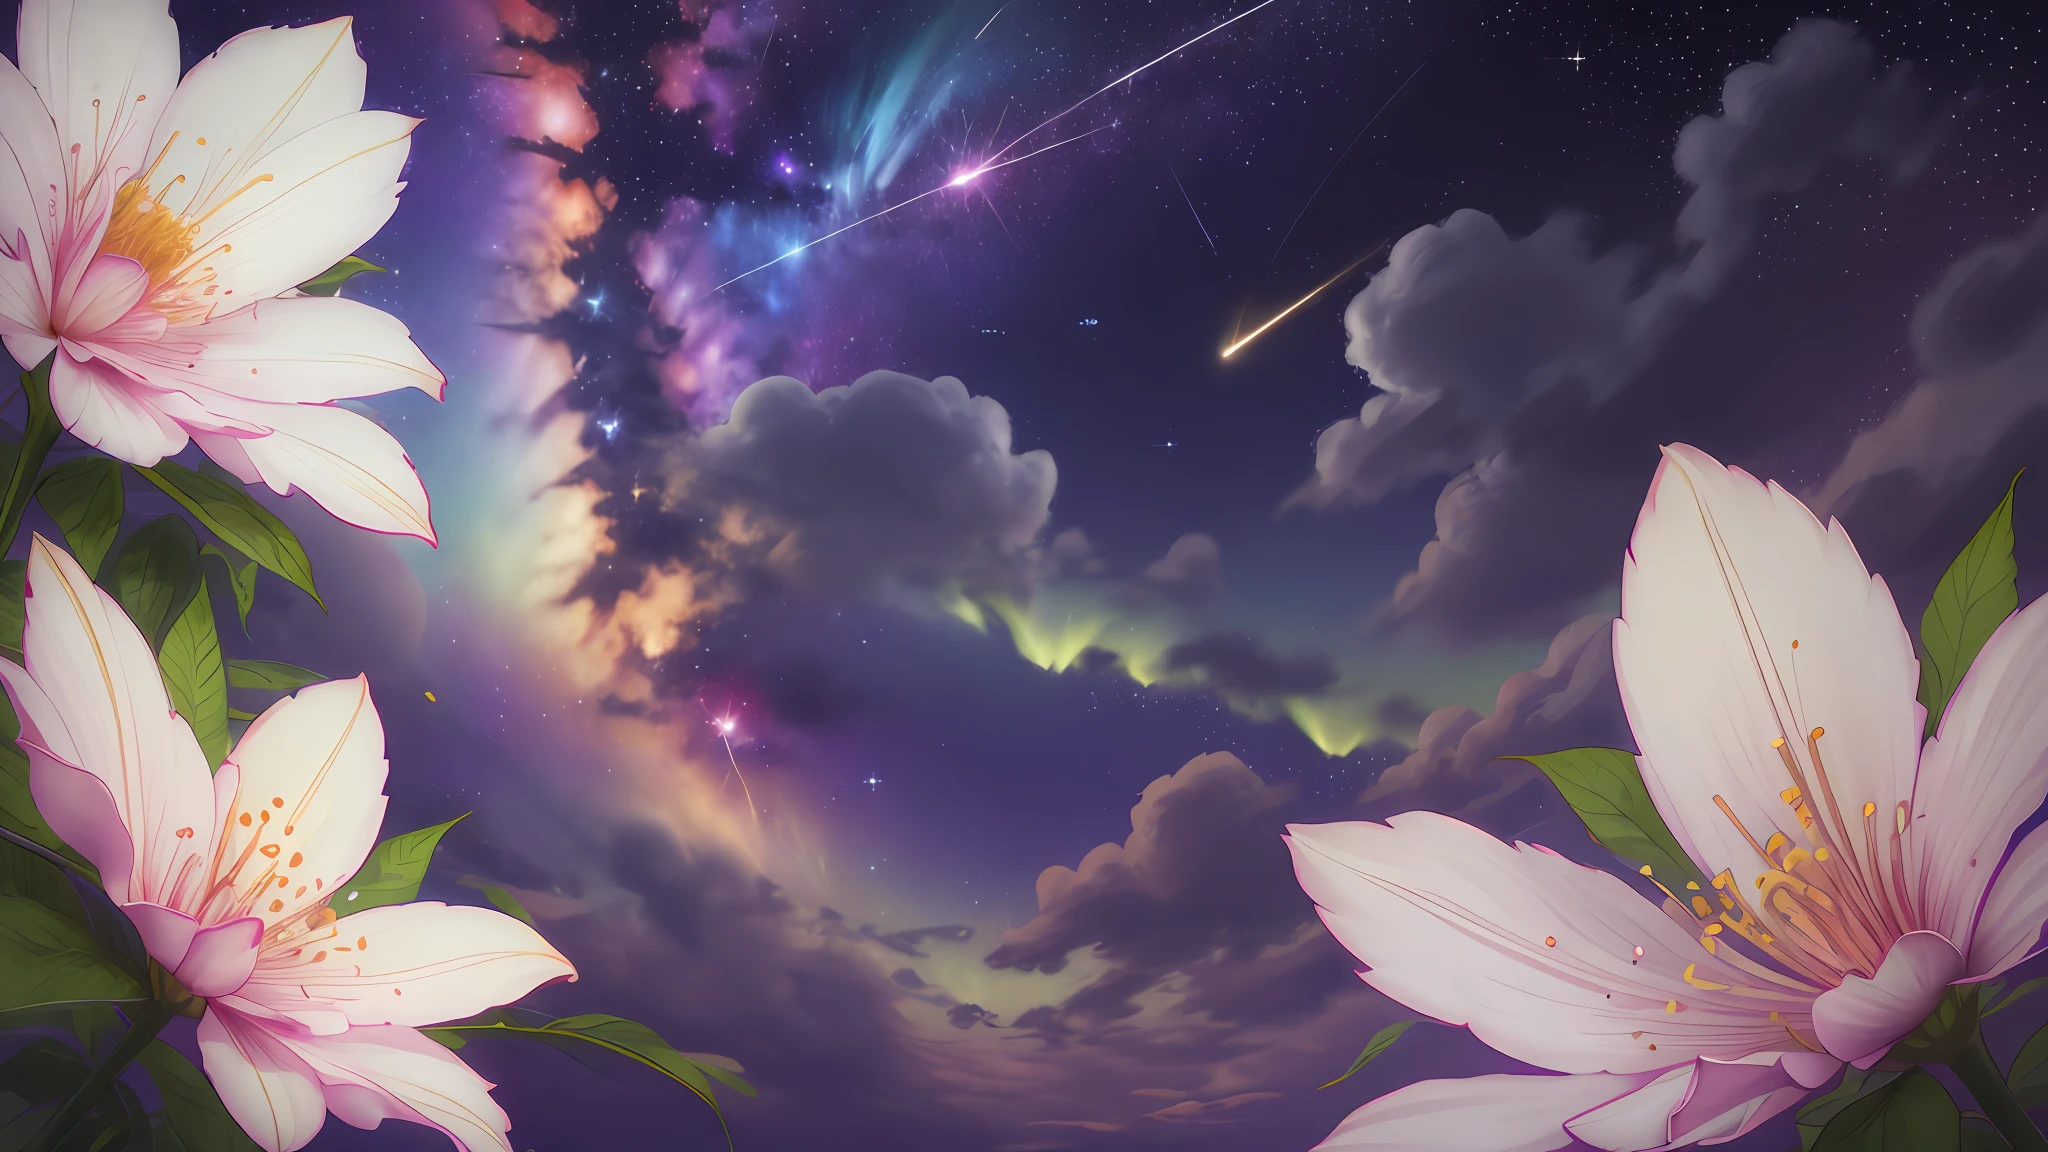 (zoomed out:1.1), (meteor shower:1.2), (comet:1.1), low angle, aroura borealis, shooting star, cloud, colorful, starry, stars, night, flower field, flower blossom, night sky, beautiful flowers, night theme, Surrealism, high detail, from below, from below, Hyperrealism, Impressionism, best quality, masterpiece, UHD, retina, award winning, 4K, anatomically correct, super detail